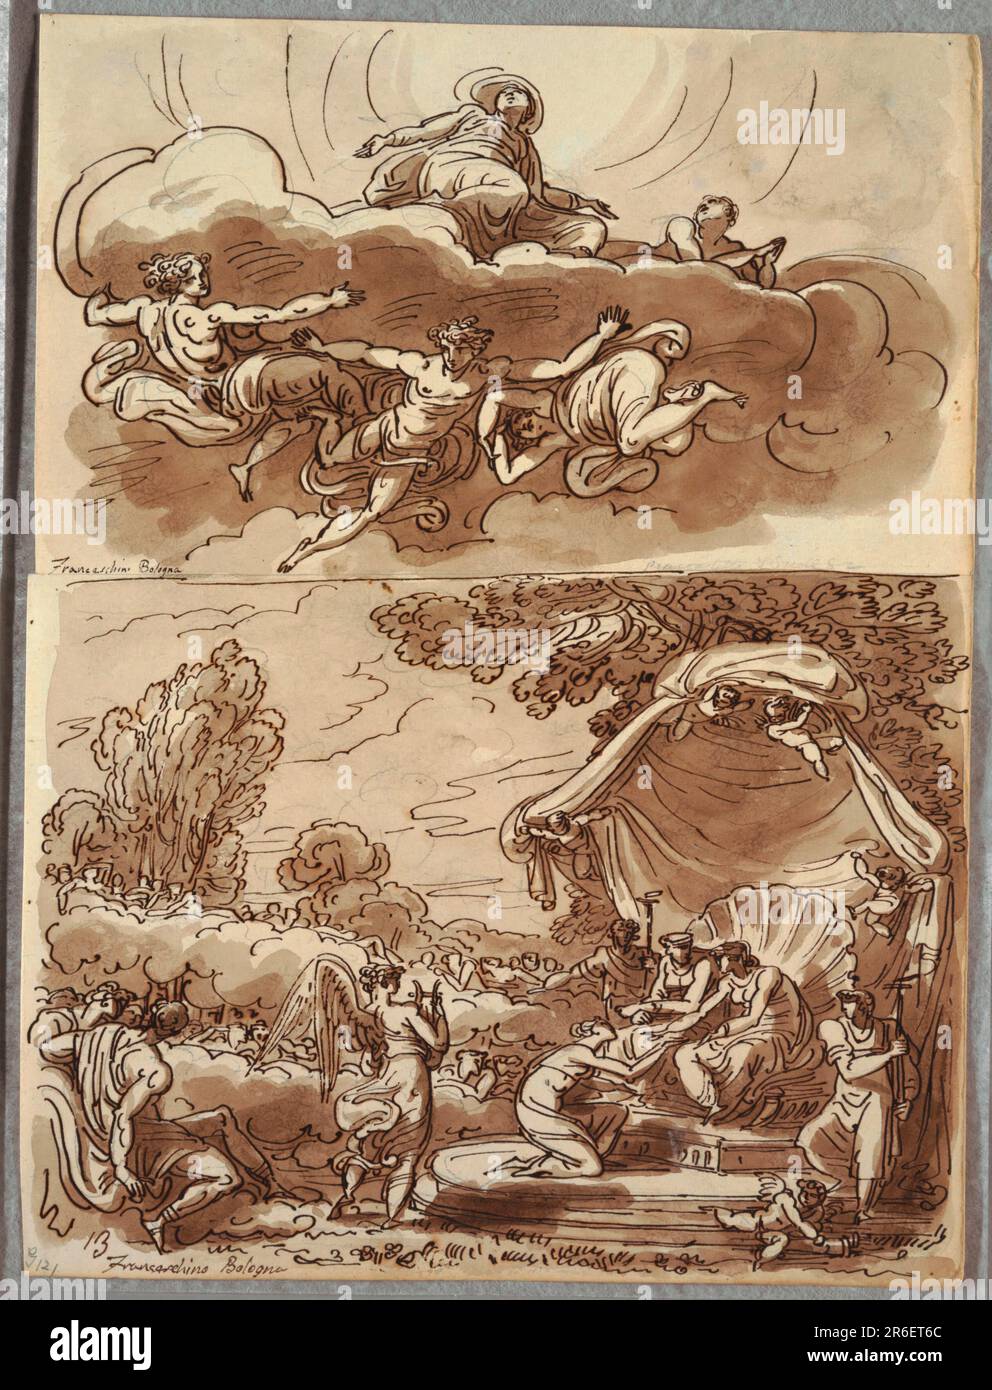 Upper drawing of seated Virgin on clouds with four angels; Lower drawing of landscape with Venus and male(?) figure on shell-backed throne. At Venus' right stands torch-bearer; at her left, winged-male figure with lyre; woman kneels at her feet. Date: 1821-22. Pen and ink, brush and brown wash, over black chalk on heavy white wove paper. Museum: Cooper Hewitt, Smithsonian Design Museum. Stock Photo